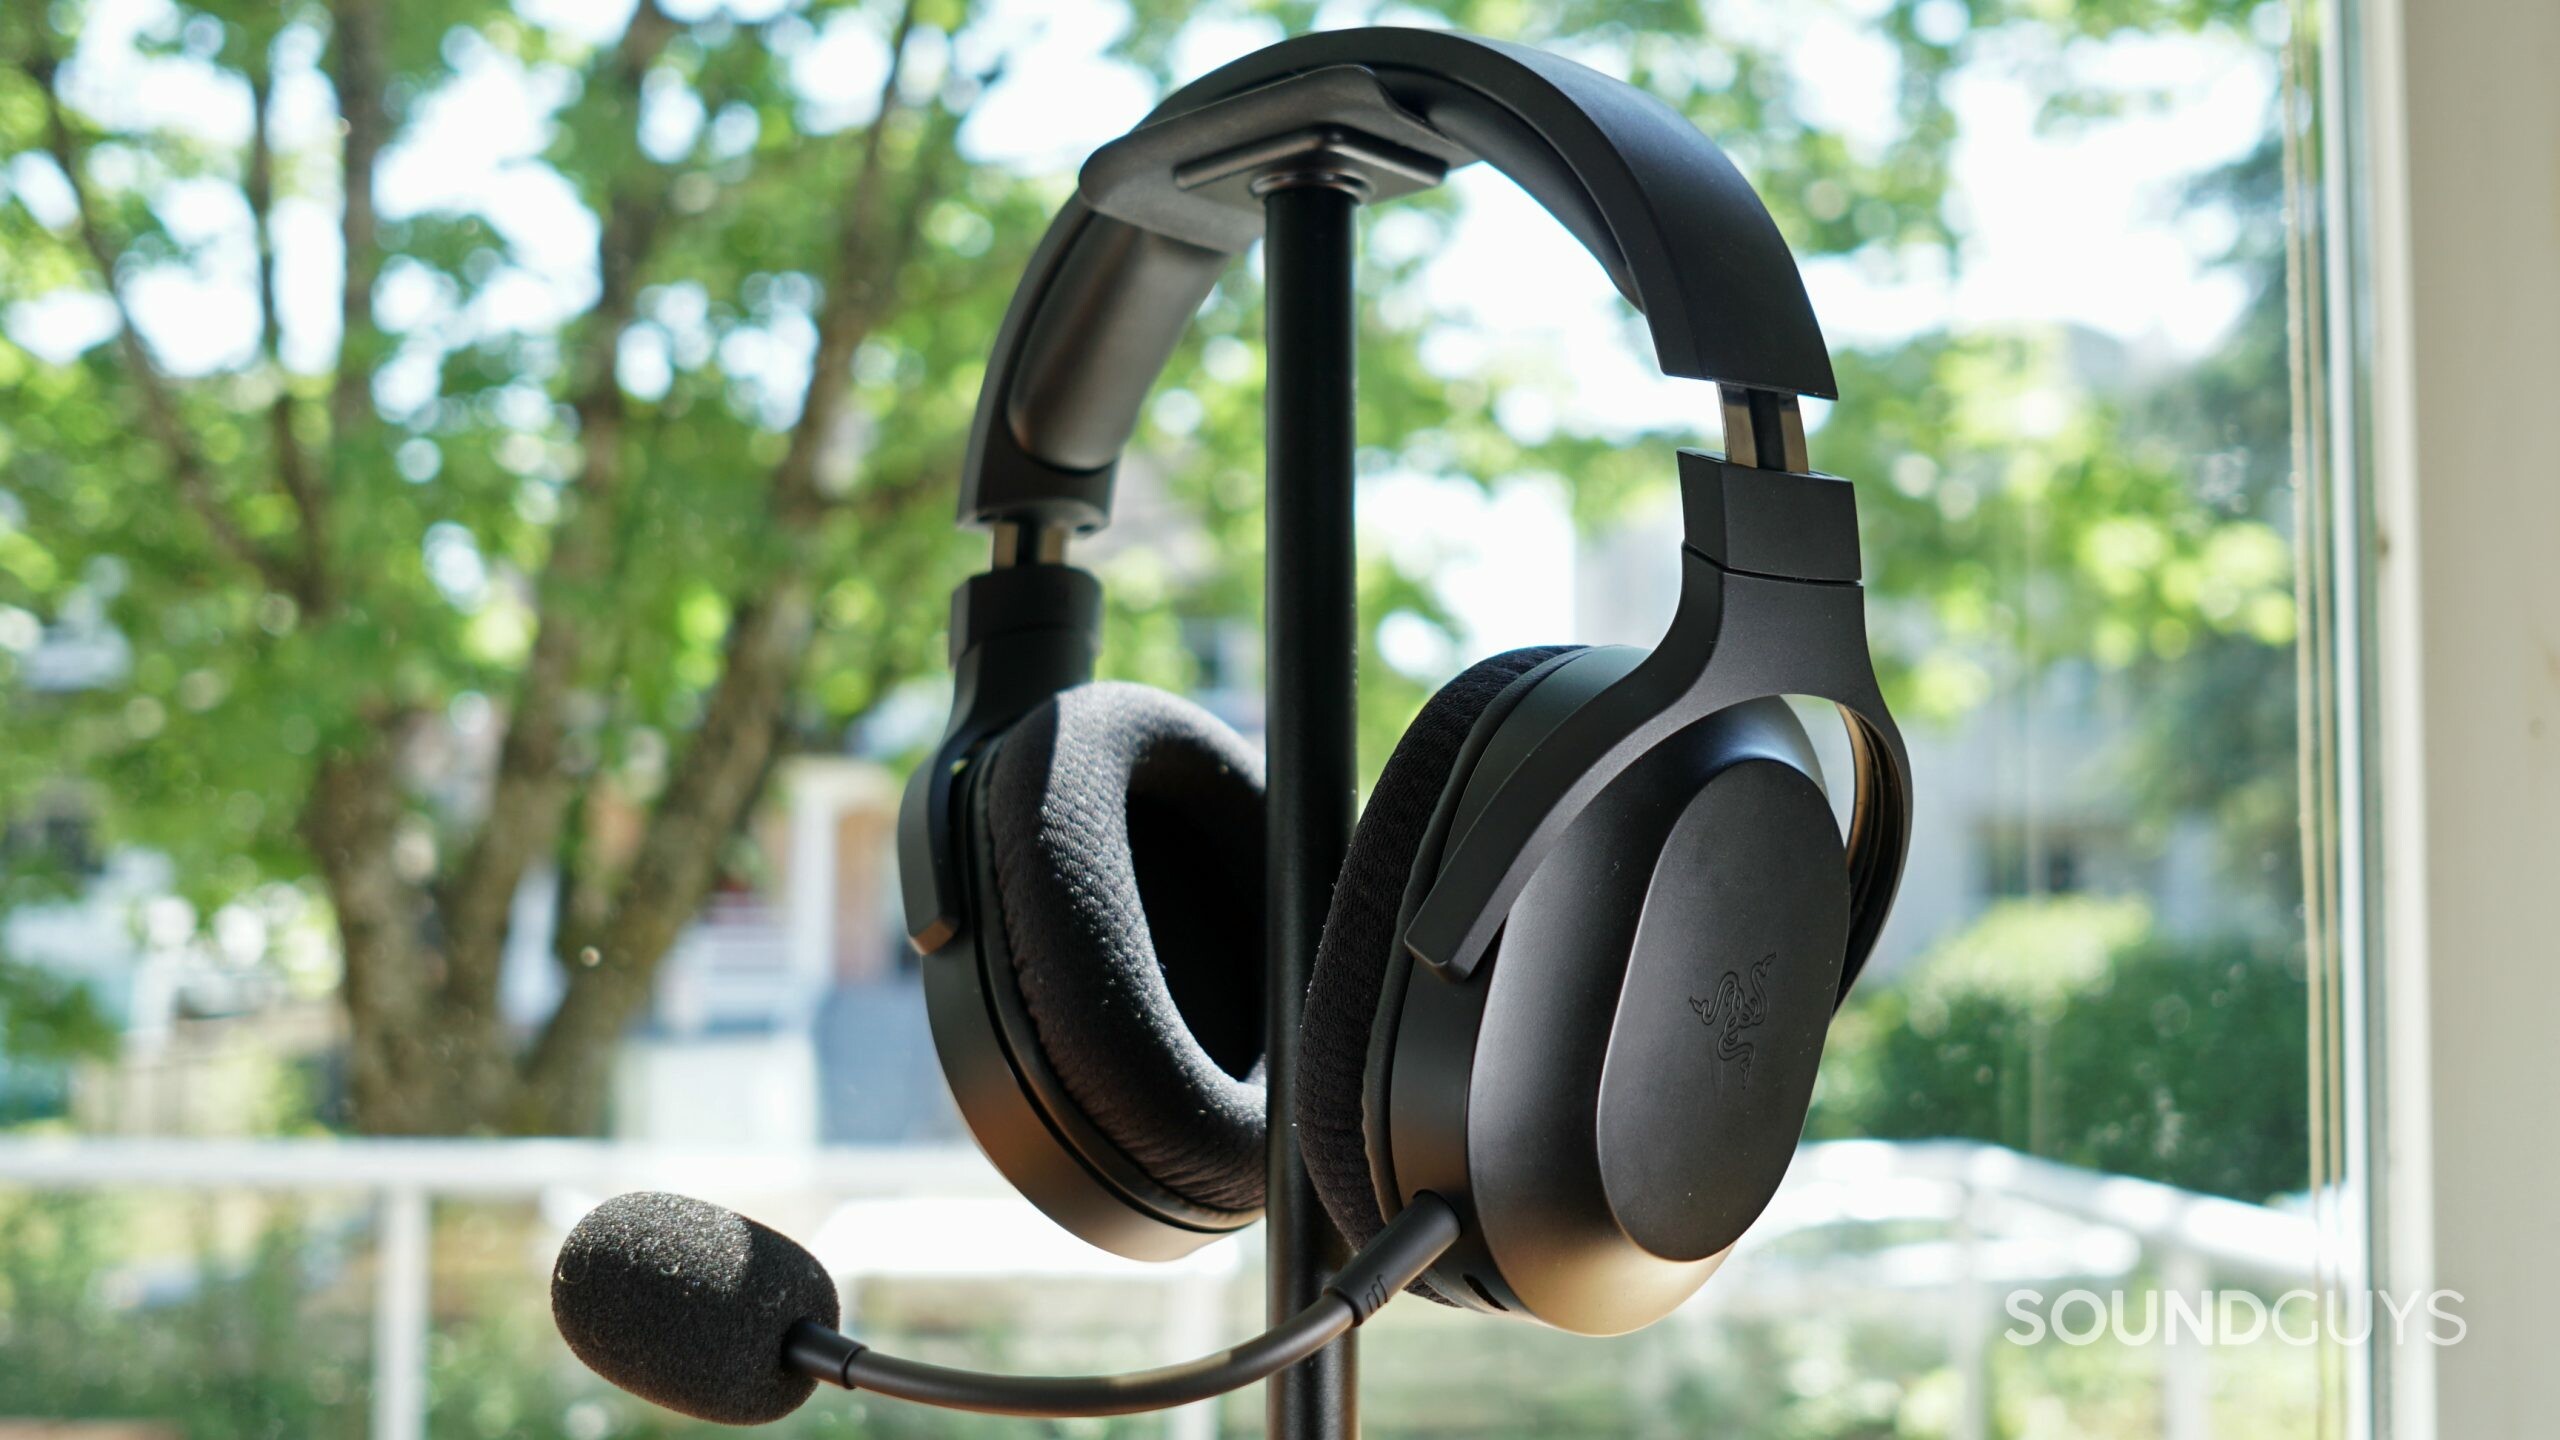 Razer Barracuda X Wireless gaming headset in review - only inconspicuous on  the outside?